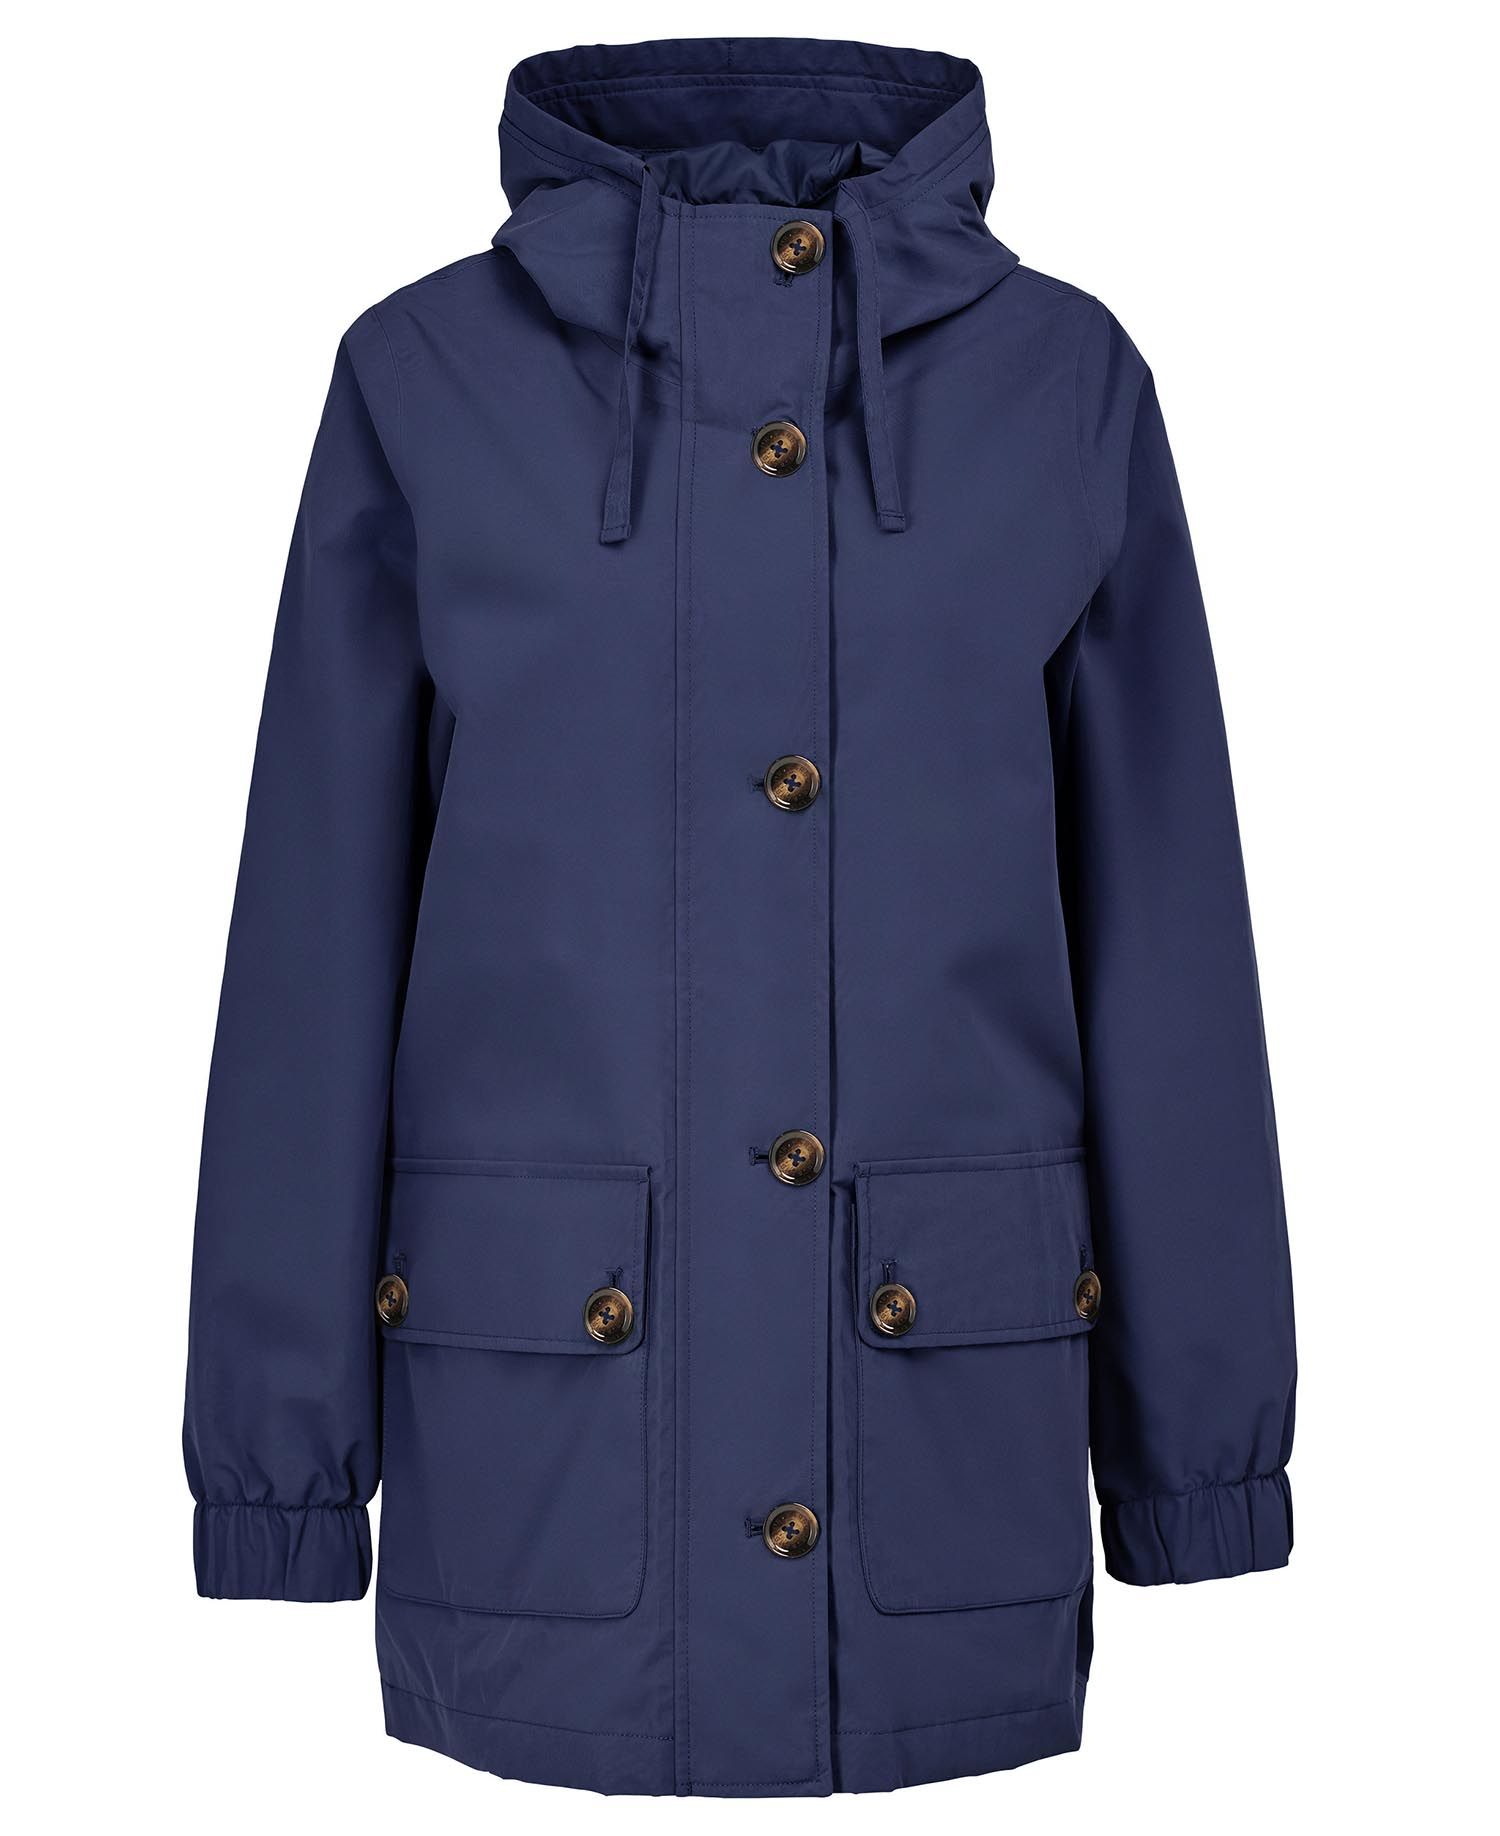 Barbour Somalia Waterproof Jacket Navy | My Country City Style